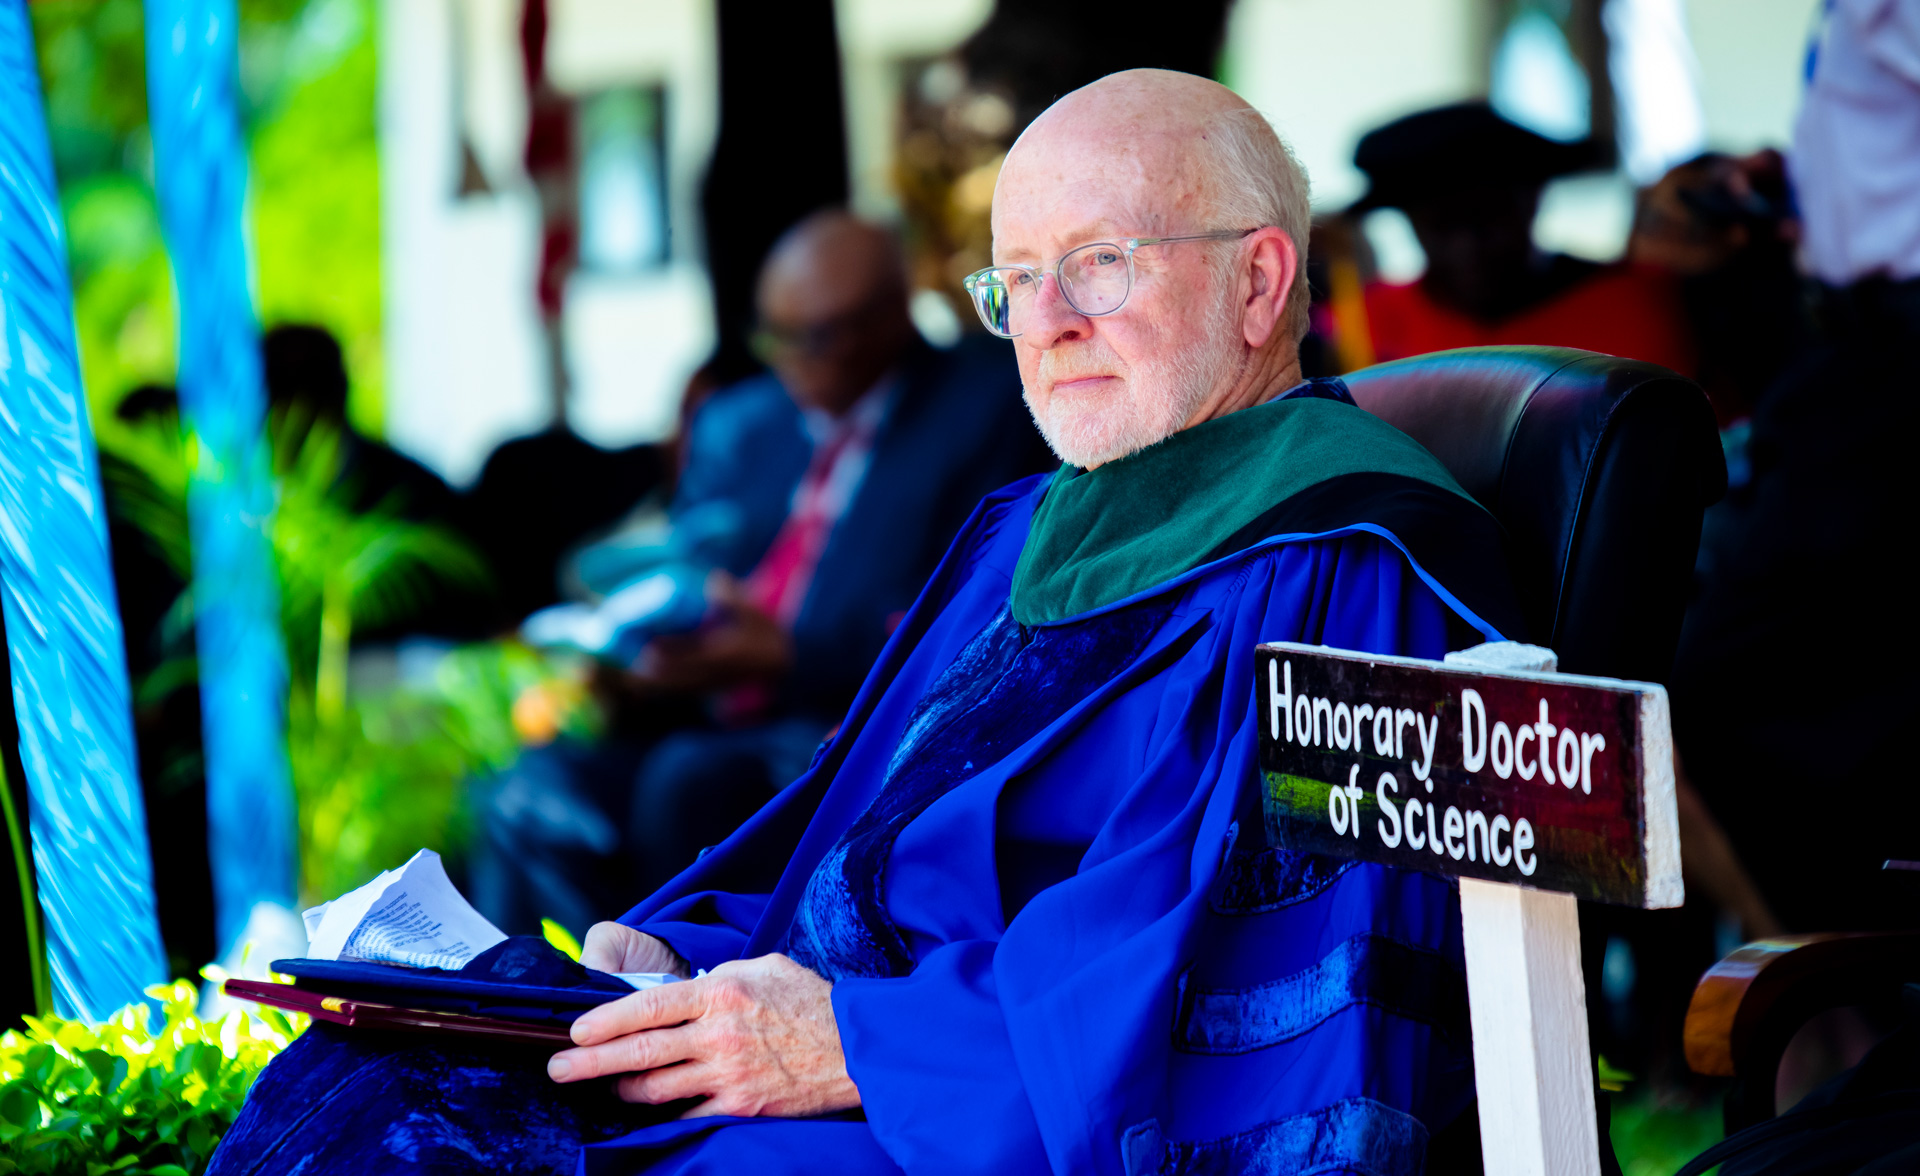 Ford von Reyn at the Muhimbili University of Health and Allied Sciences commencement